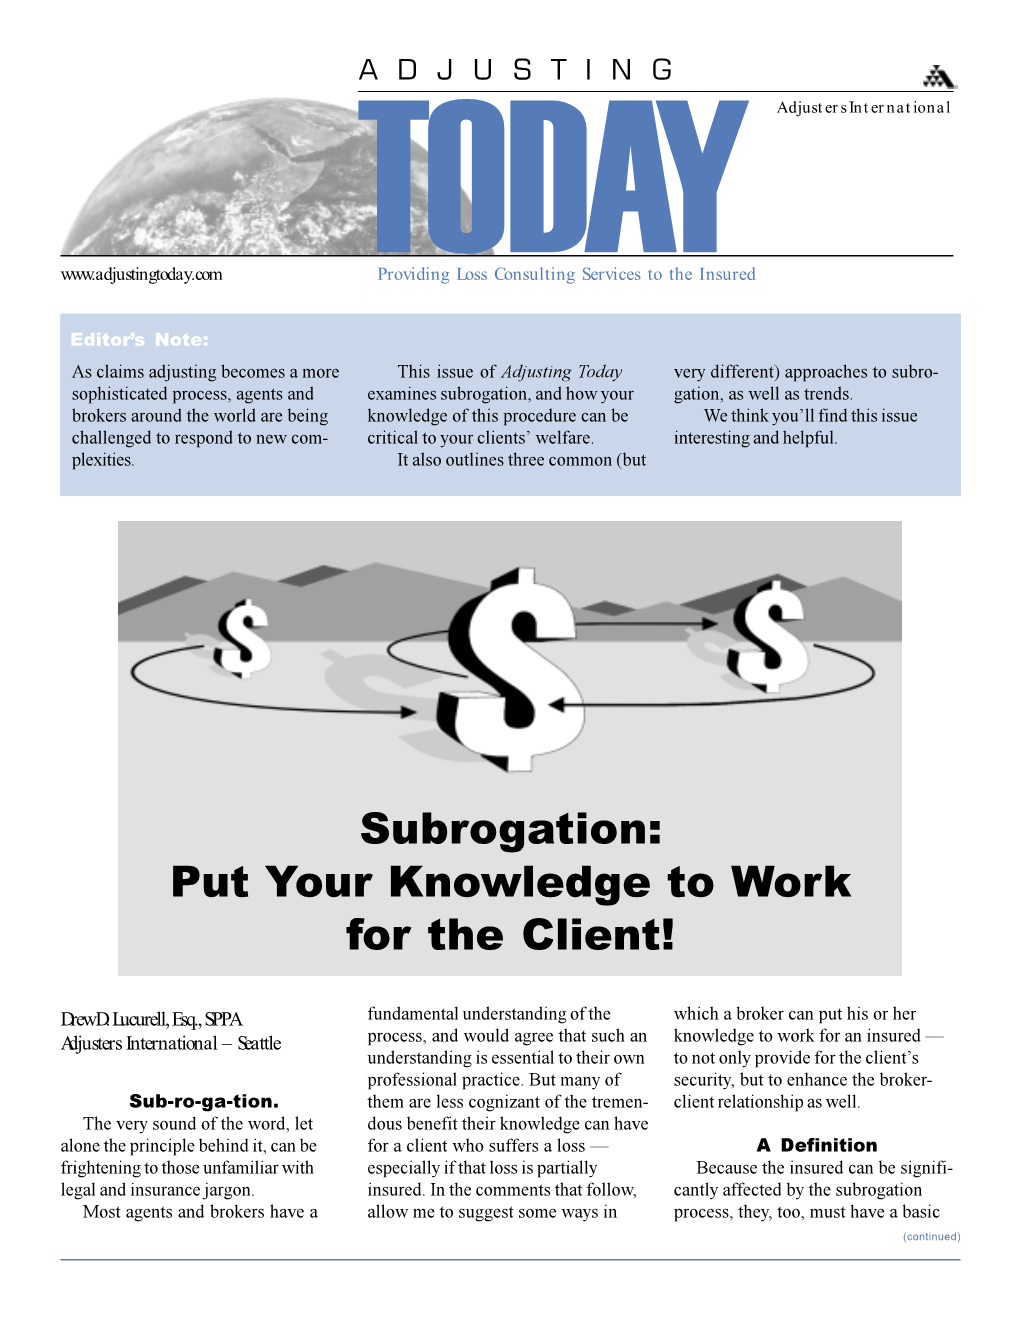 Subrogation: Put Your Knowledge to Work for the Client!